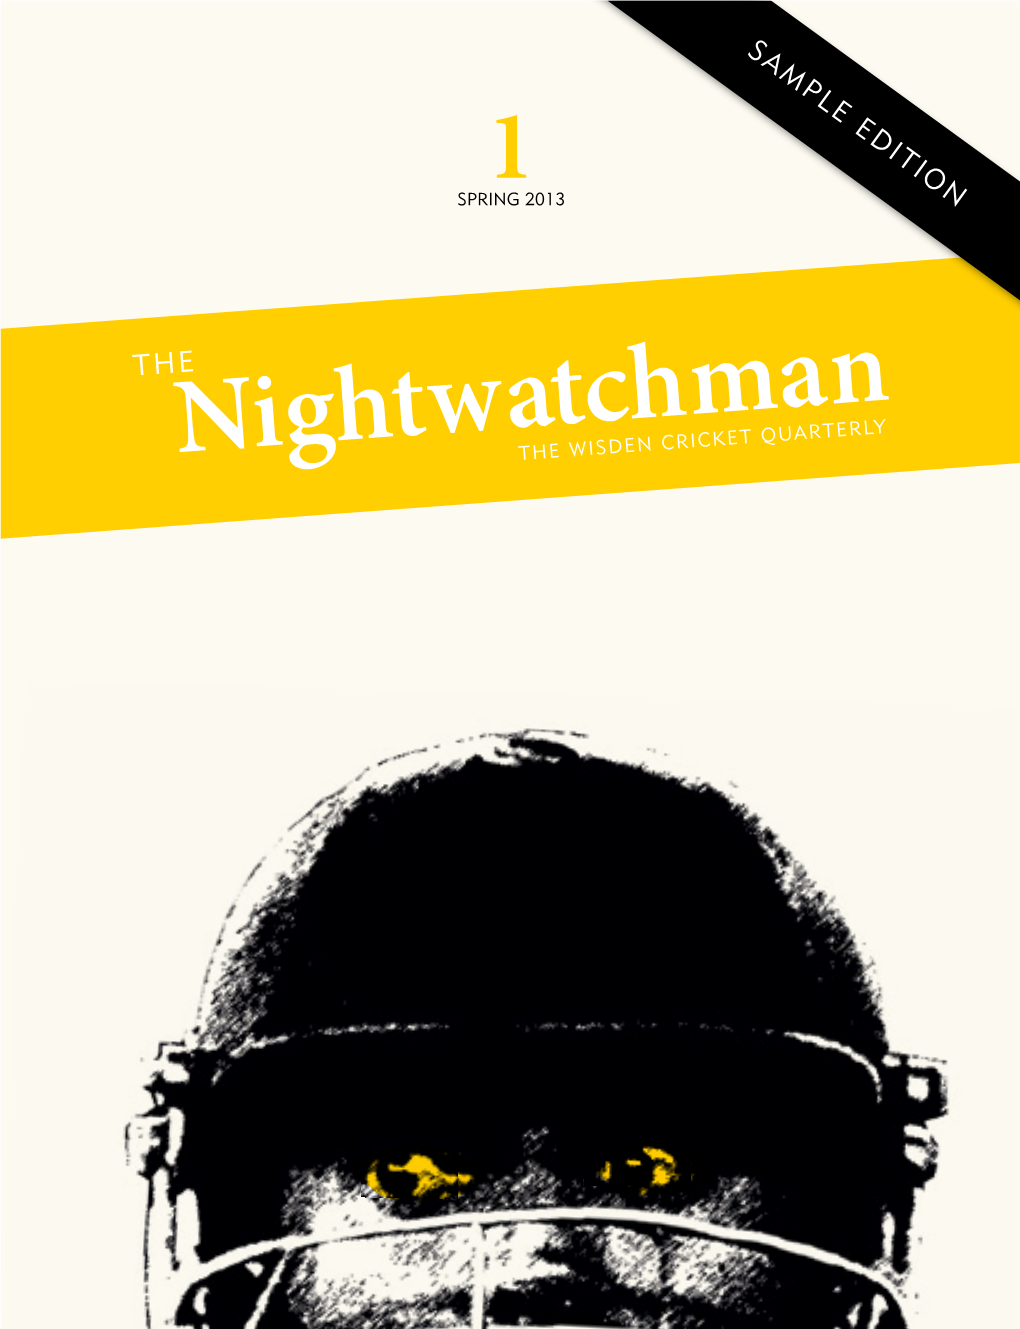 The Nightwatchman Is a Quarterly Collection of Essays and Long-Form Articles Debuting in March 2013 and Available in Print and E-Book Formats